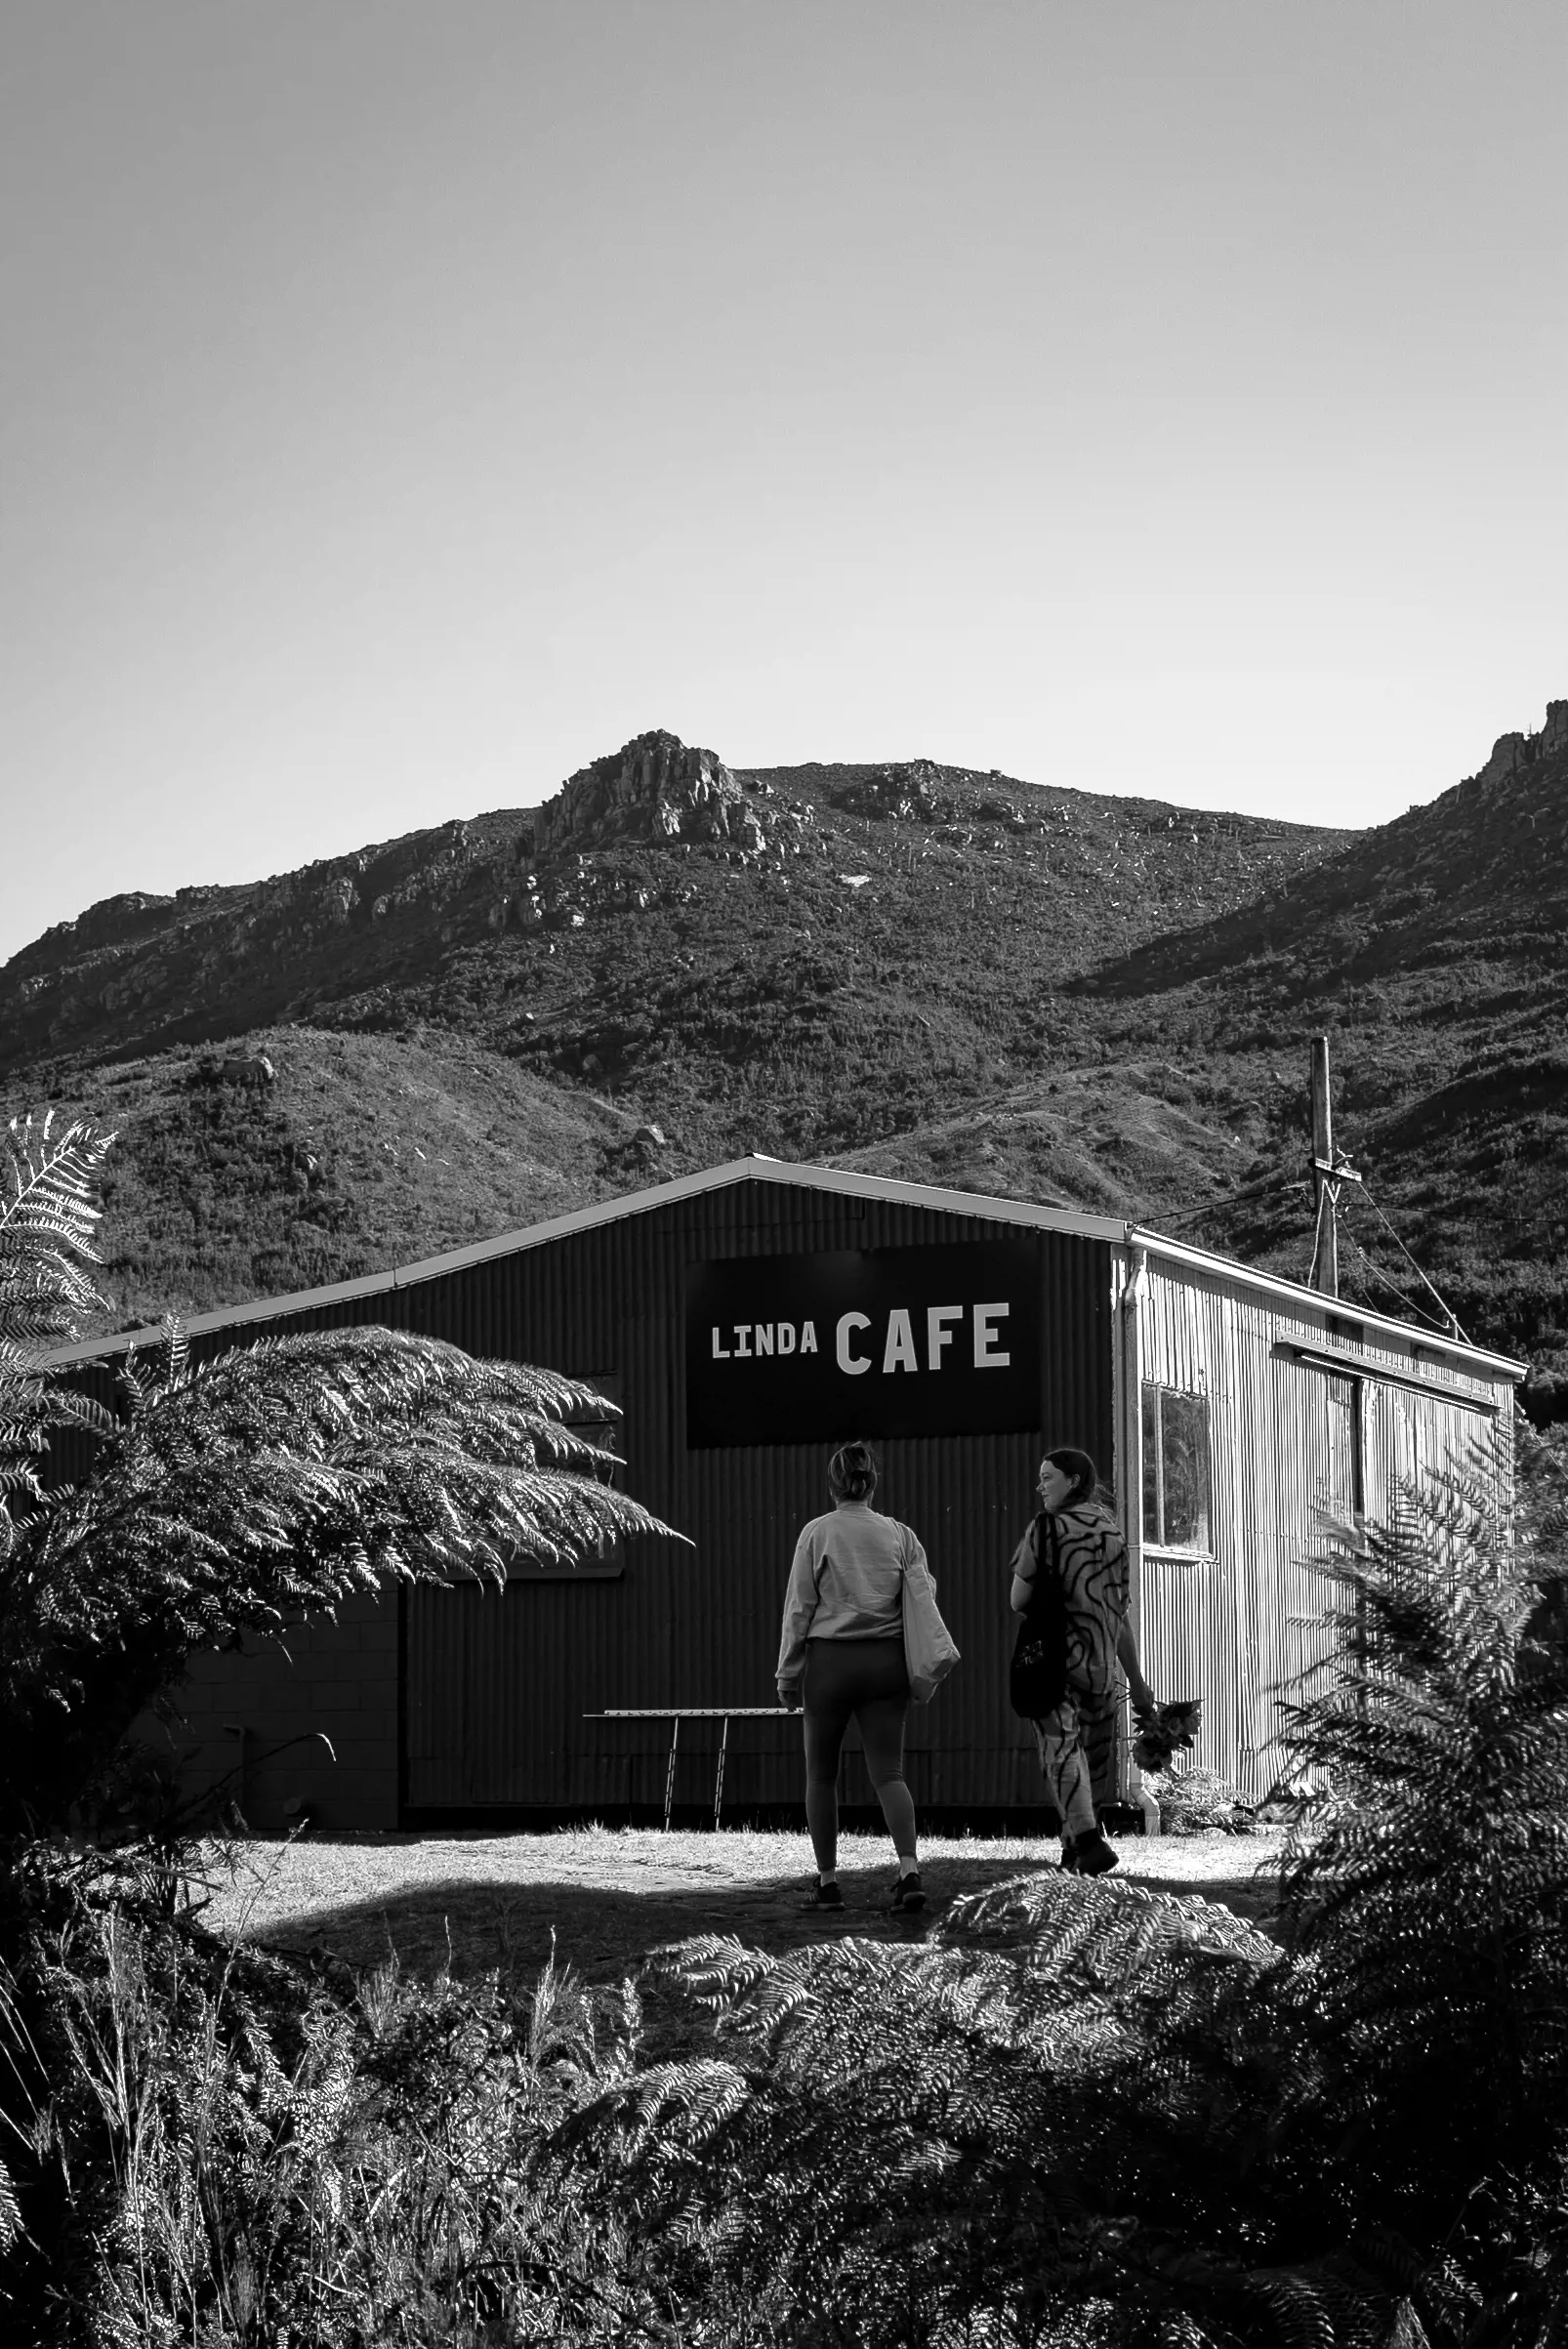 Two people stand on a wooden deck at the side of a large wooden shed-like structure with the words Linda Cafe hand-painted on one side.